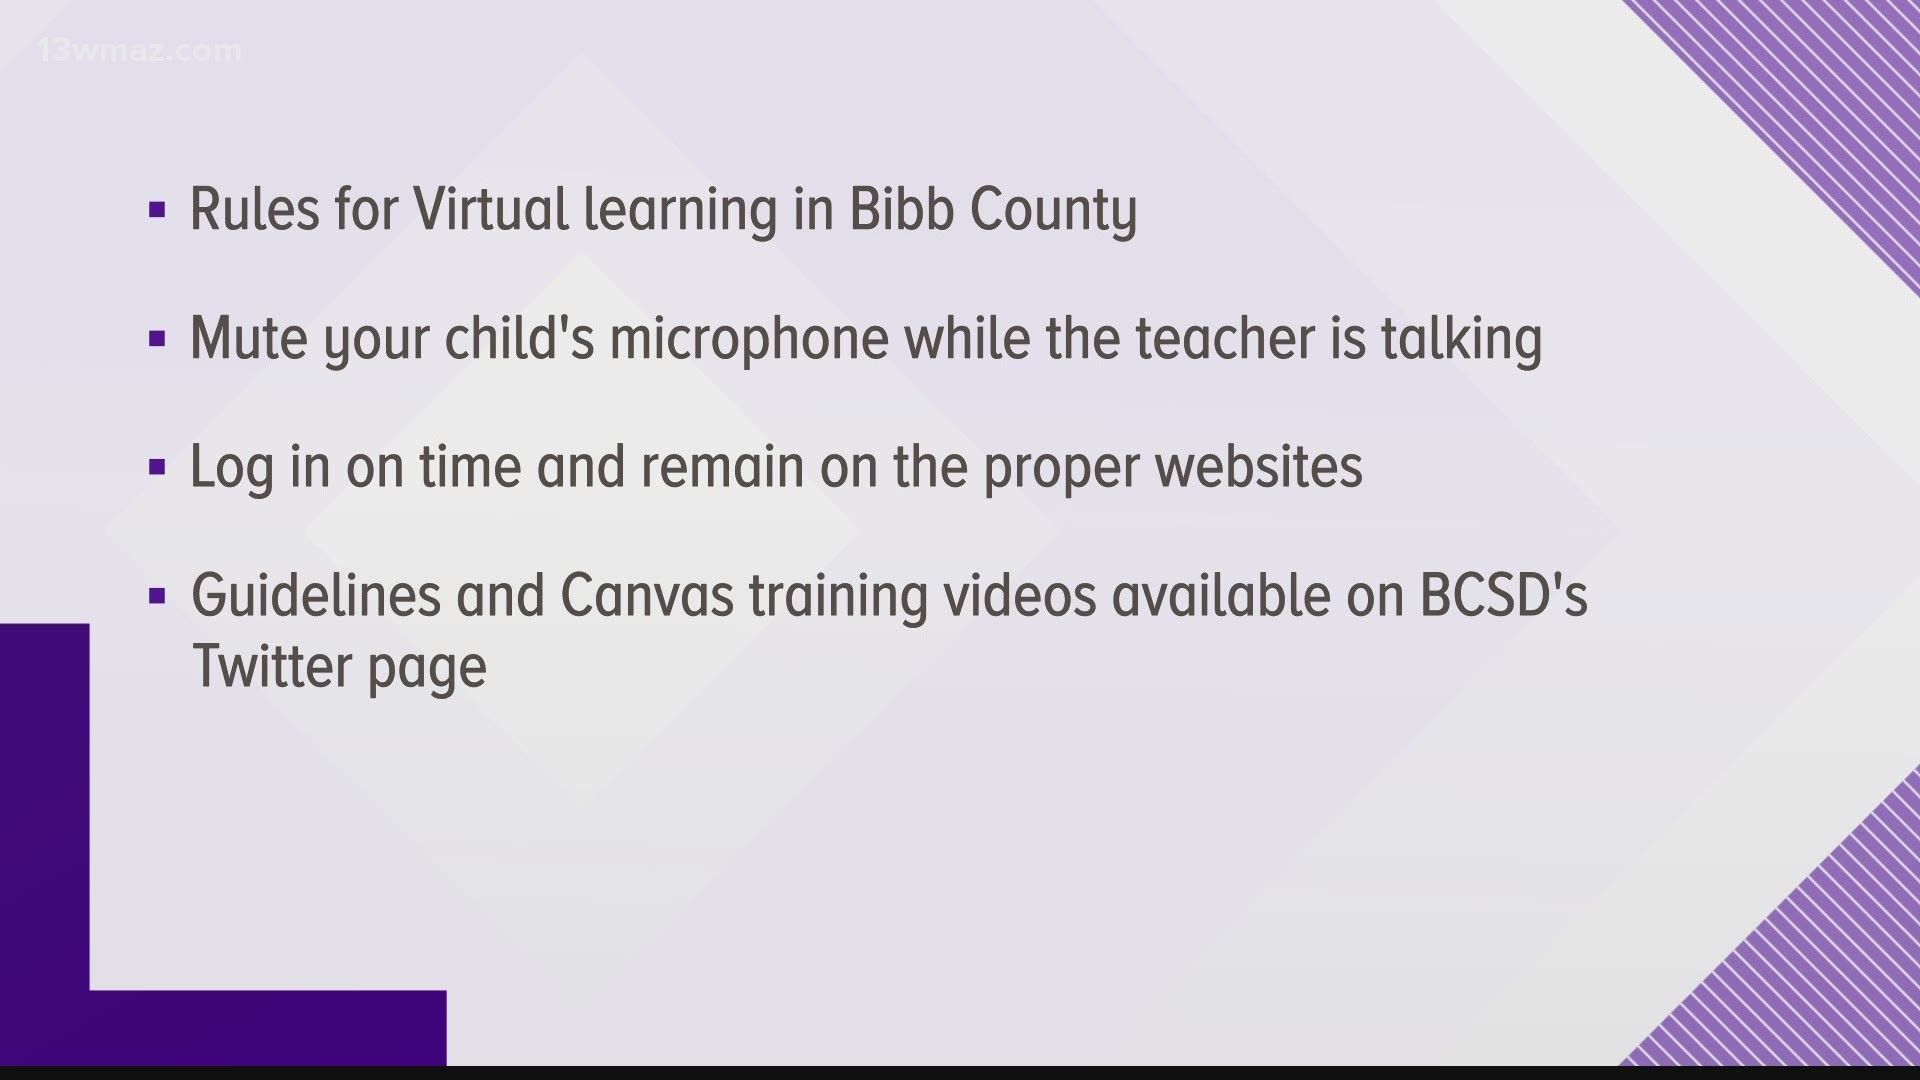 Expectations for students and videos to help parents log-in to Canvas can be found on Bibb County Schools' Twitter page.